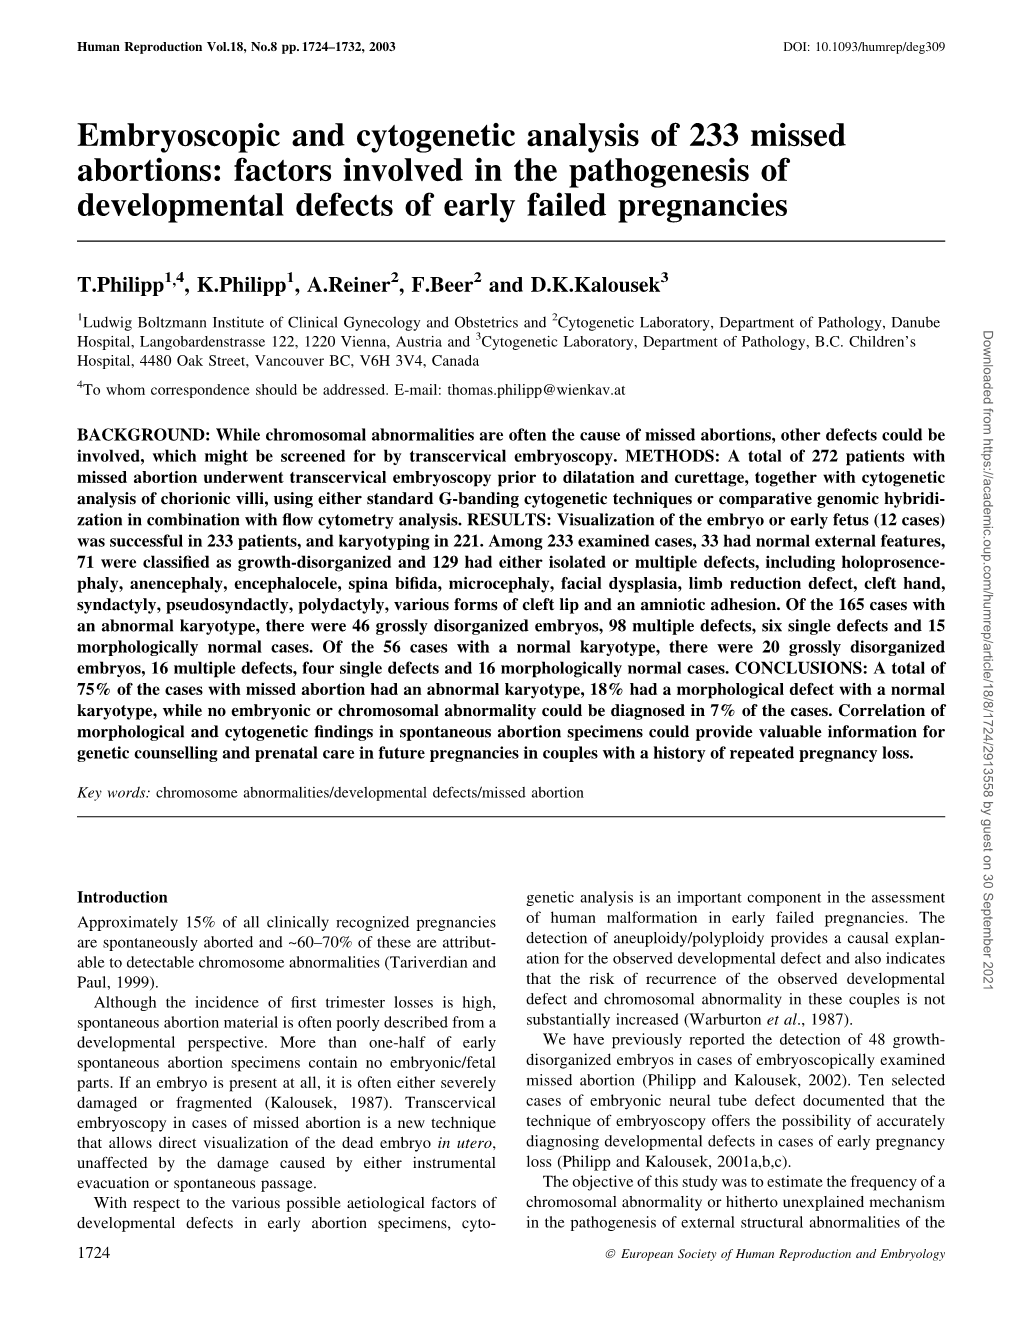 Embryoscopic and Cytogenetic Analysis of 233 Missed Abortions: Factors Involved in the Pathogenesis of Developmental Defects of Early Failed Pregnancies